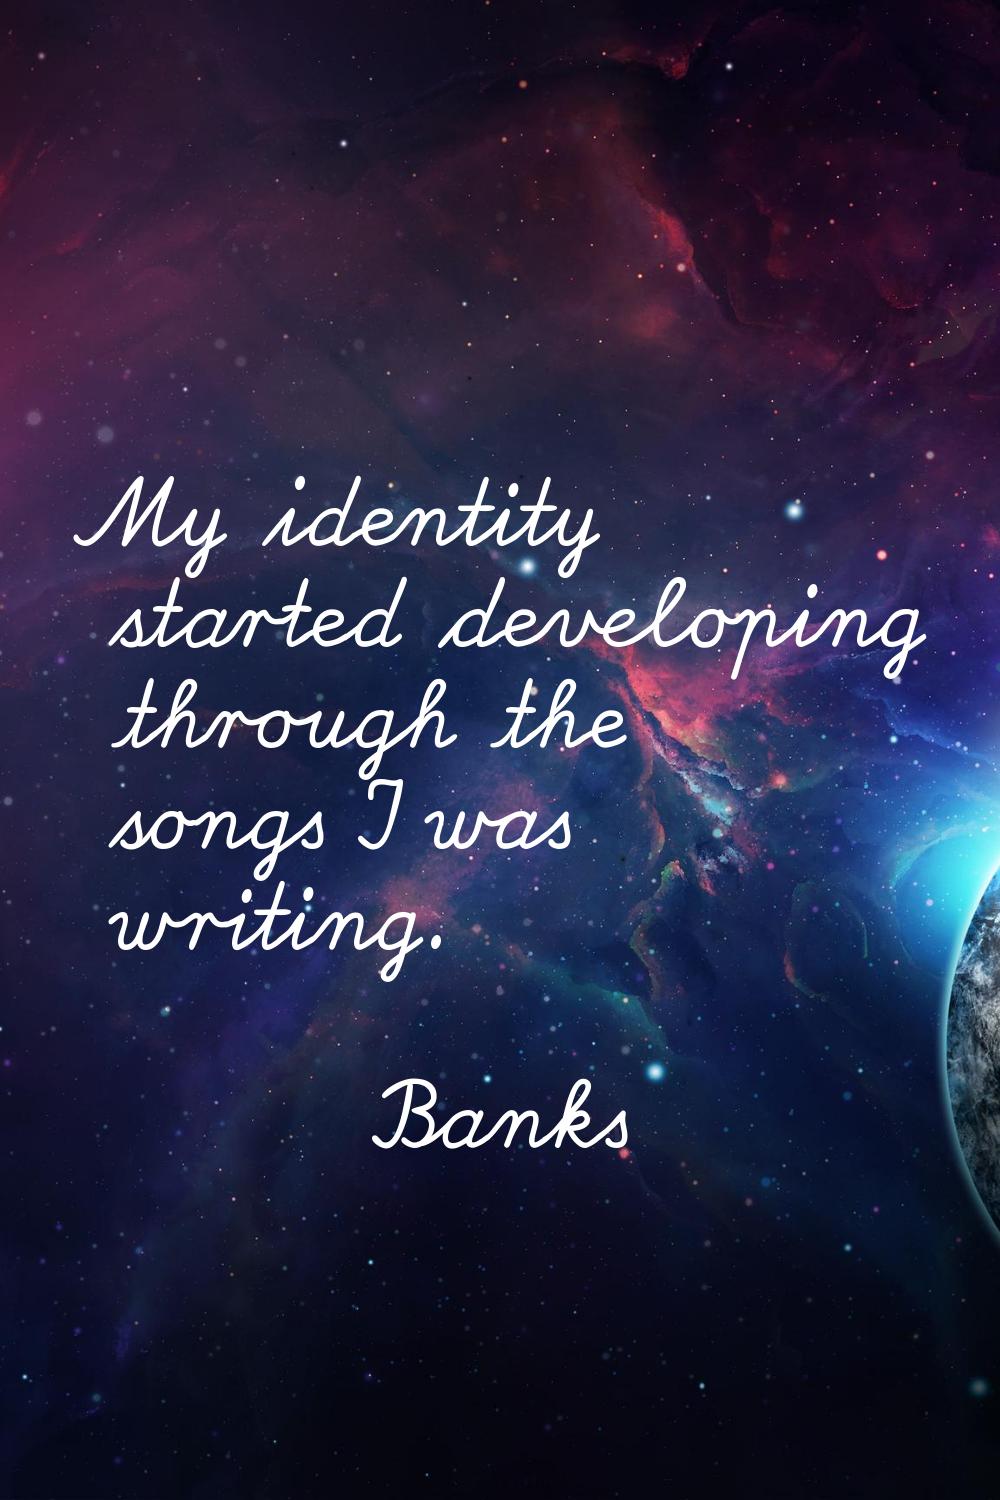 My identity started developing through the songs I was writing.